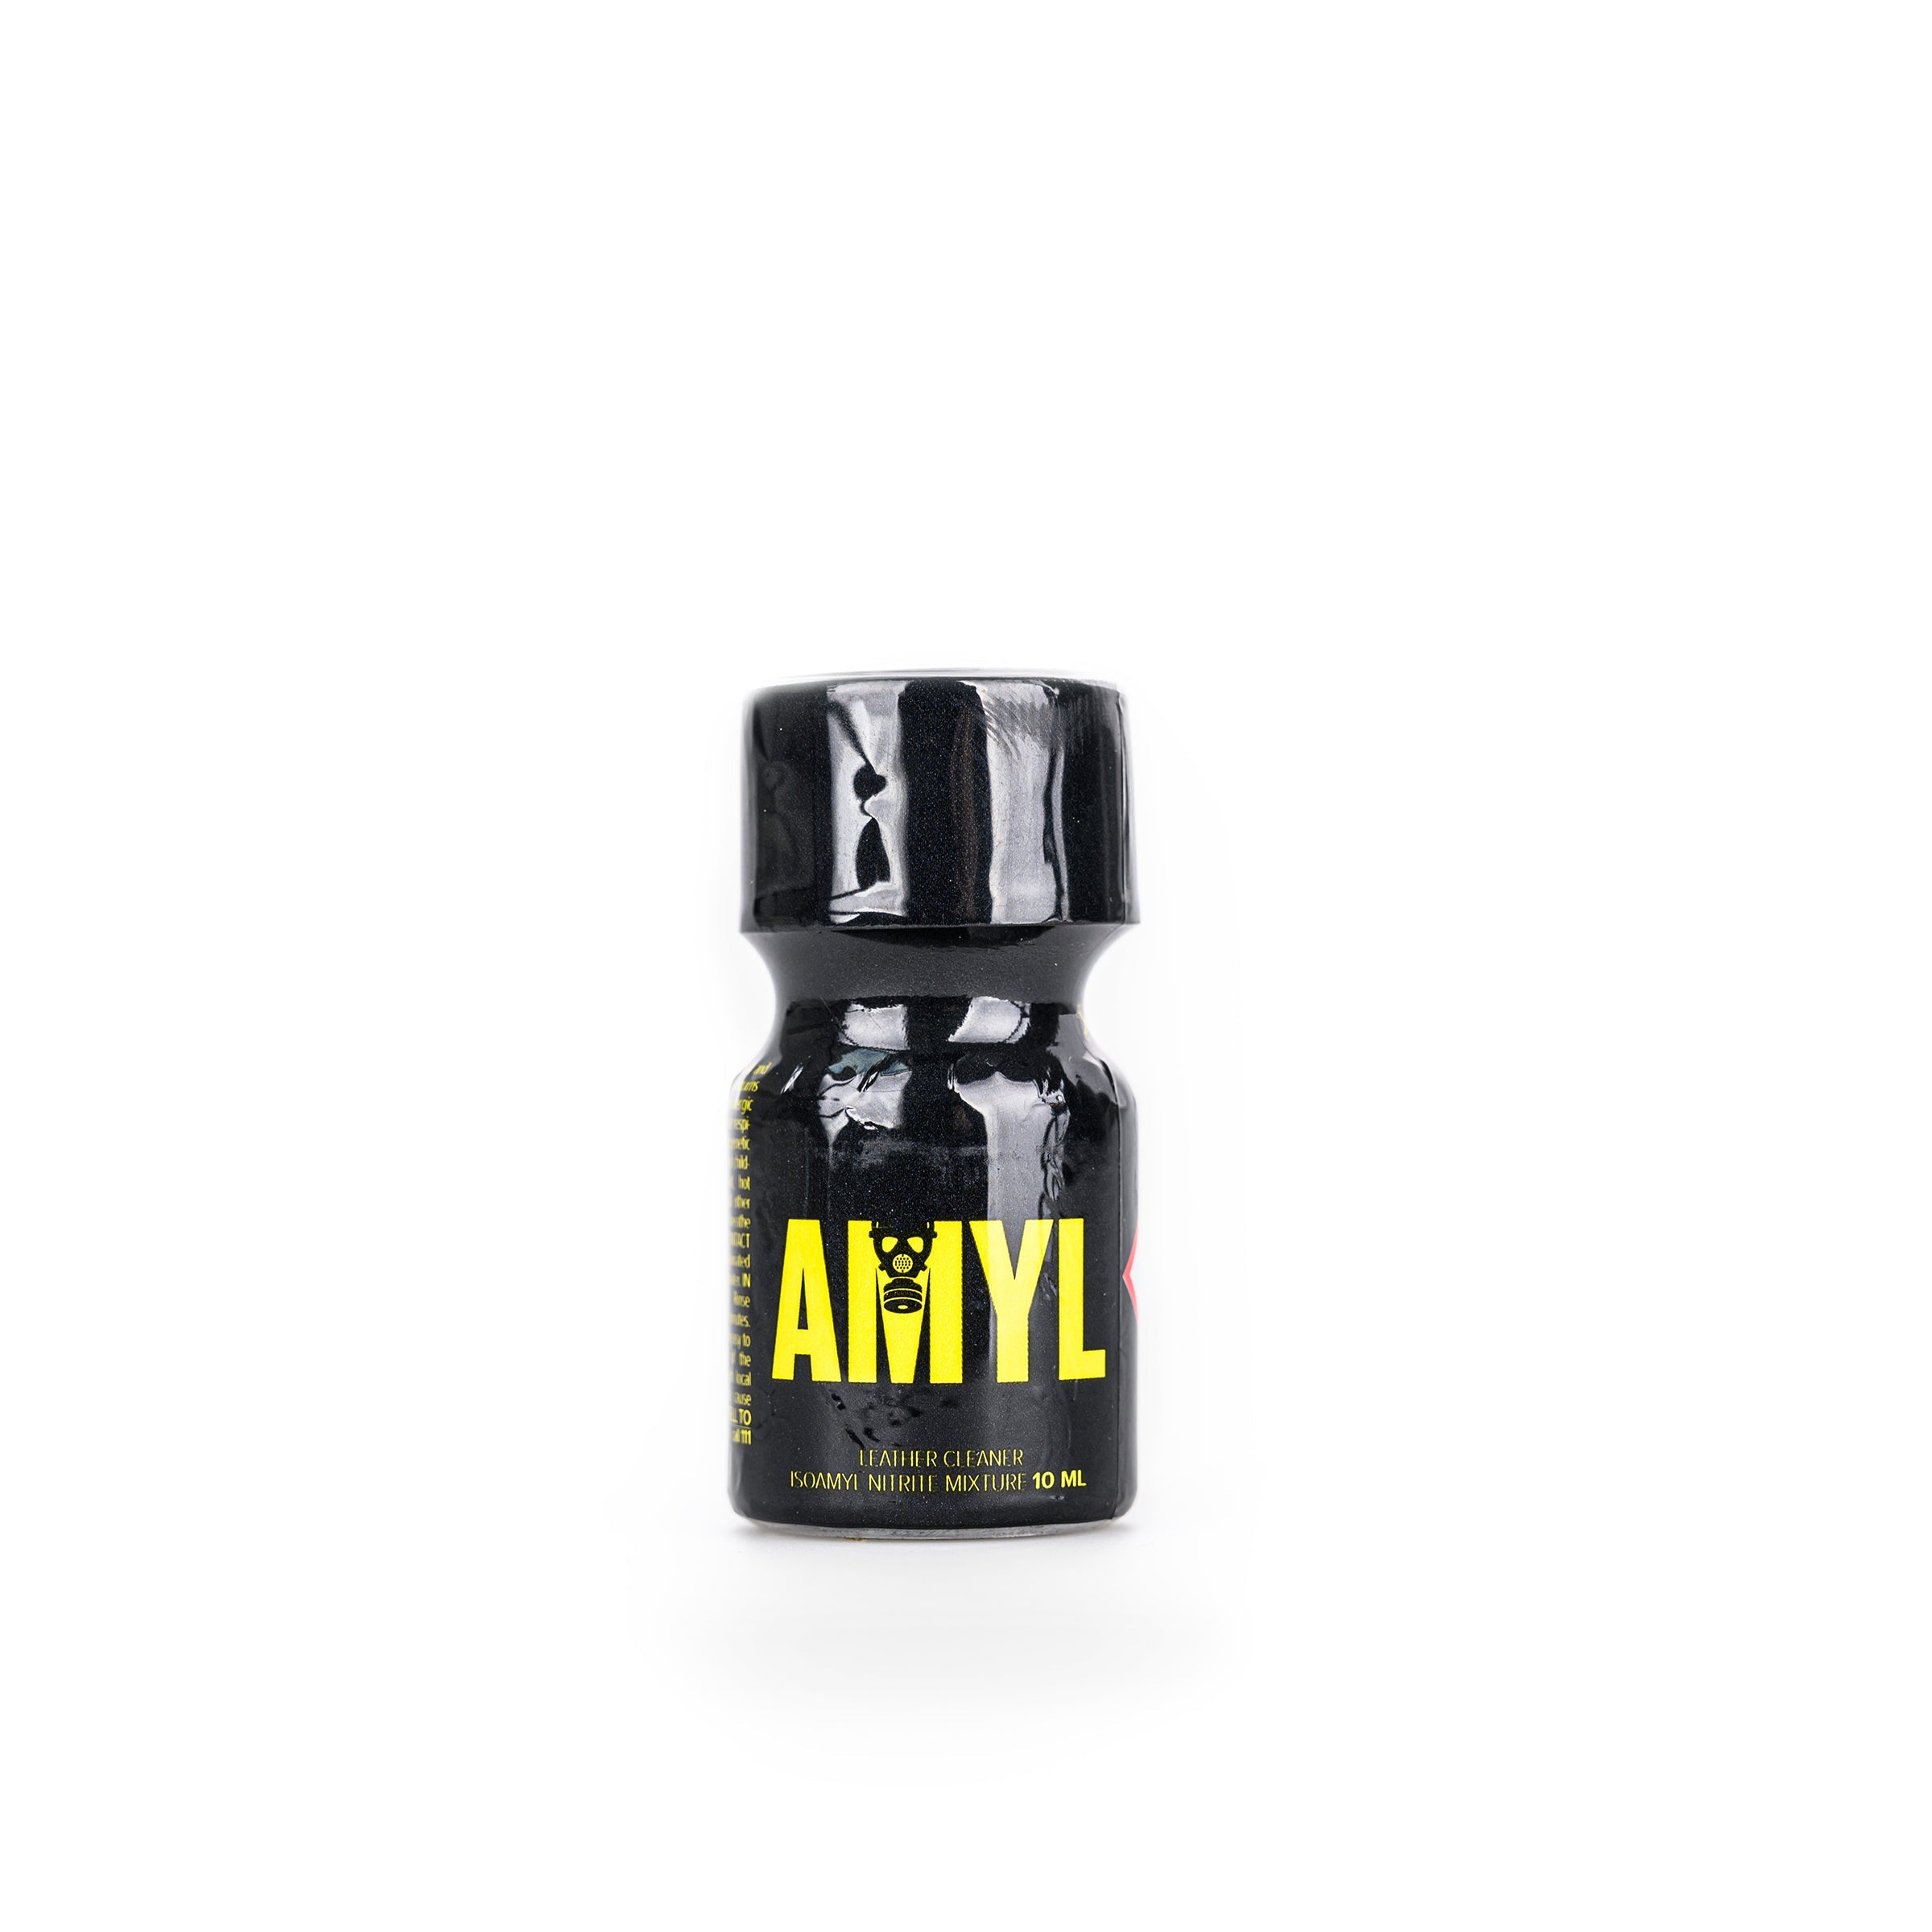 A product photo of a 10ml black bottle of Amyl brand poppers.